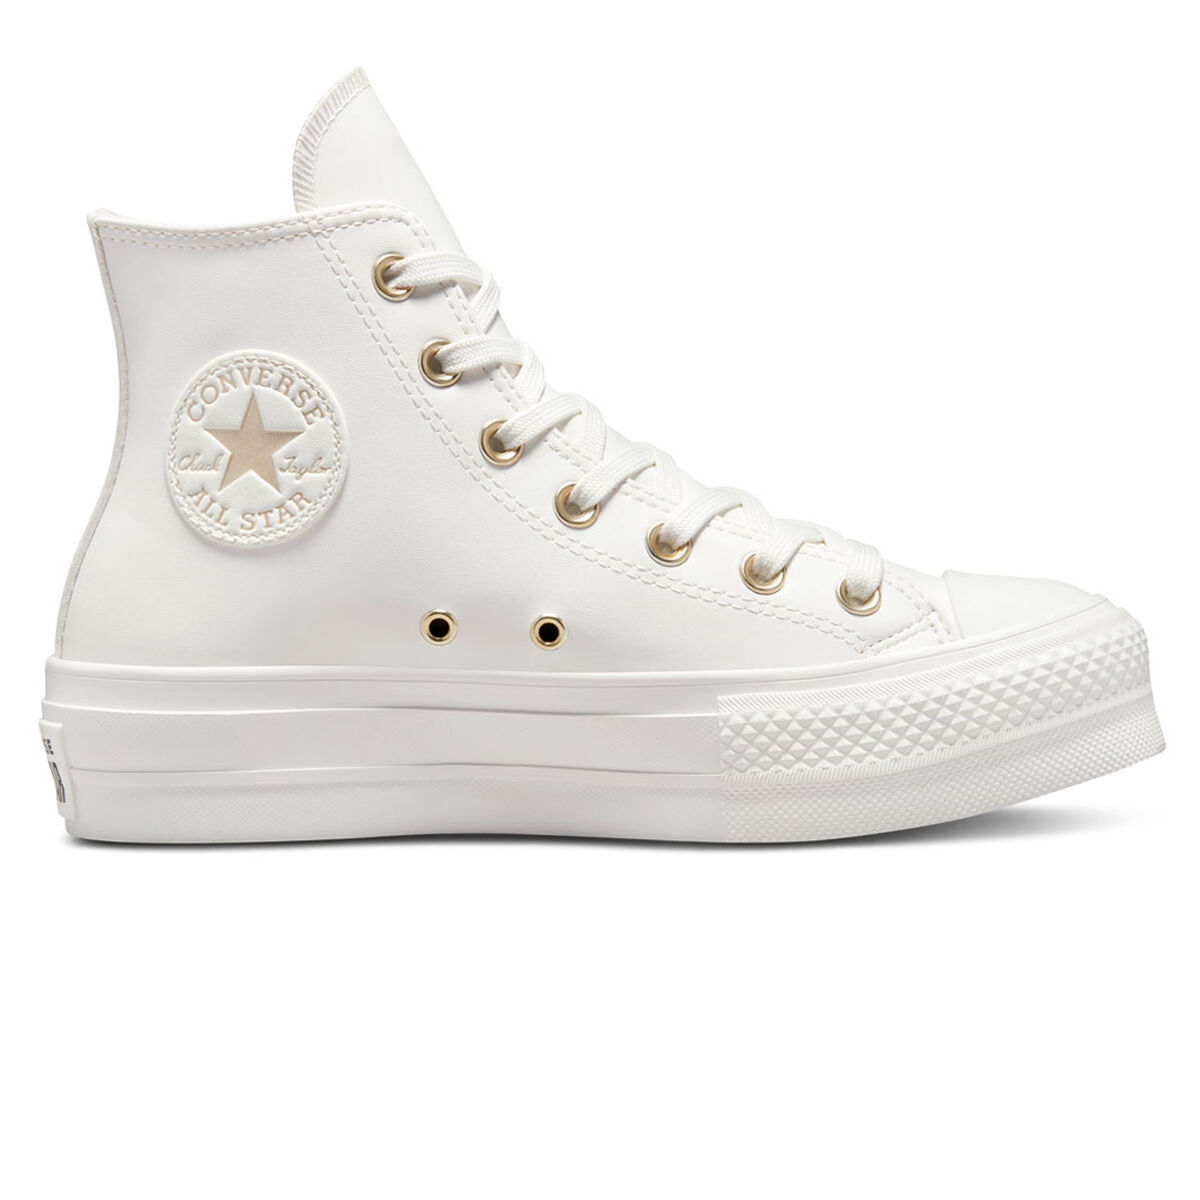 Converse Chuck Taylor All Star High Leather Womens Casual Shoes Sport